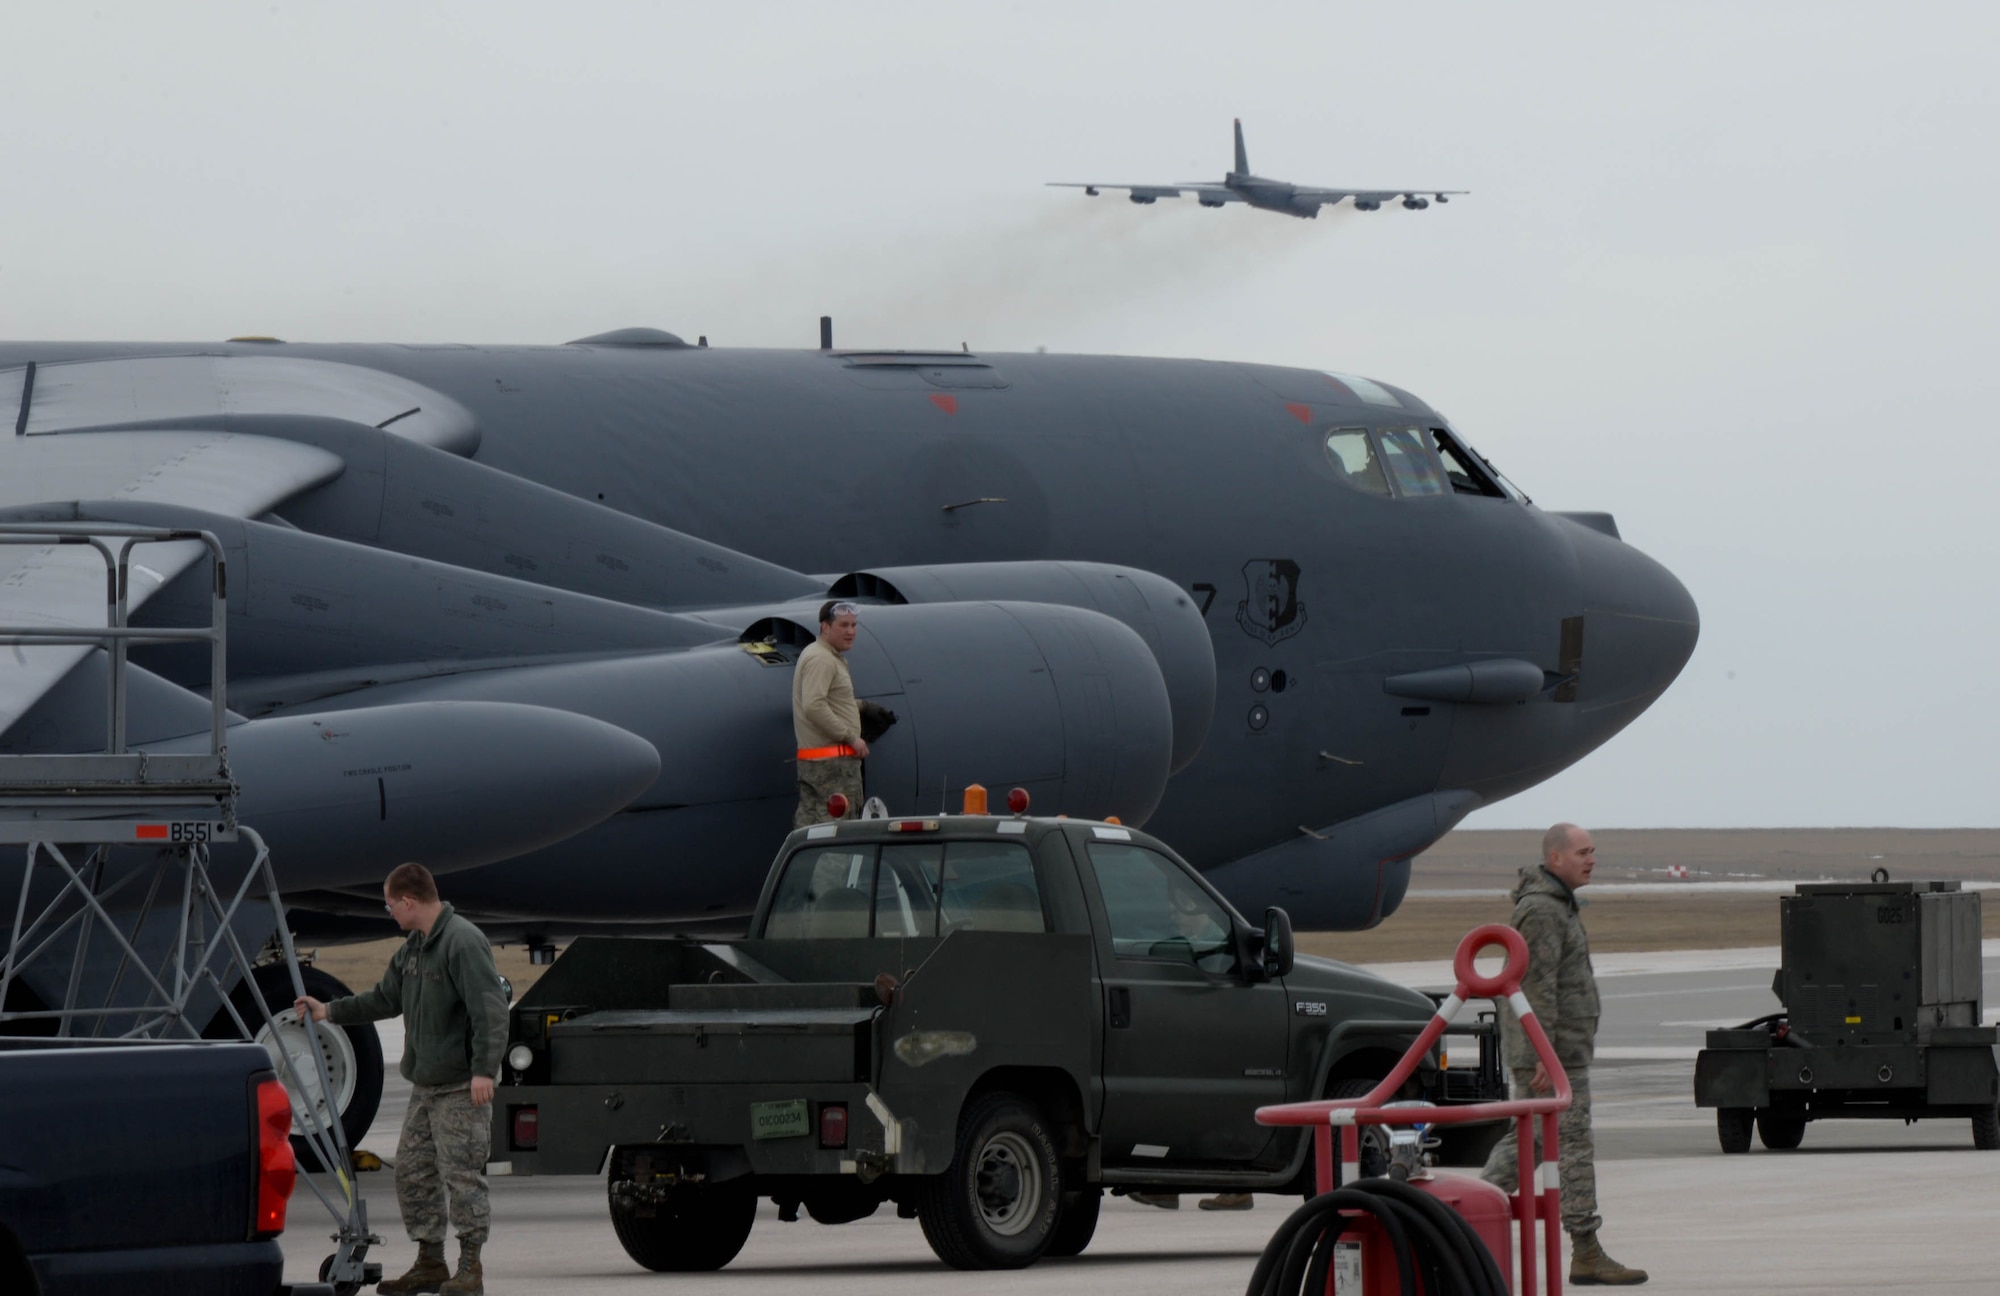 Airmen from the 5th Maintenance Squadron at Minot Air Force Base, N.D., work on a B-52 at Ellsworth AFB, S.D., March 26, 2014. Due to an ongoing runway repair at Minot, several B-52 aircraft and 300 Airmen will be on temporary duty at Ellsworth for six months to continue combat operations until repairs are complete. (U.S. Air Force photo by Senior Airman Zachary Hada/Released)